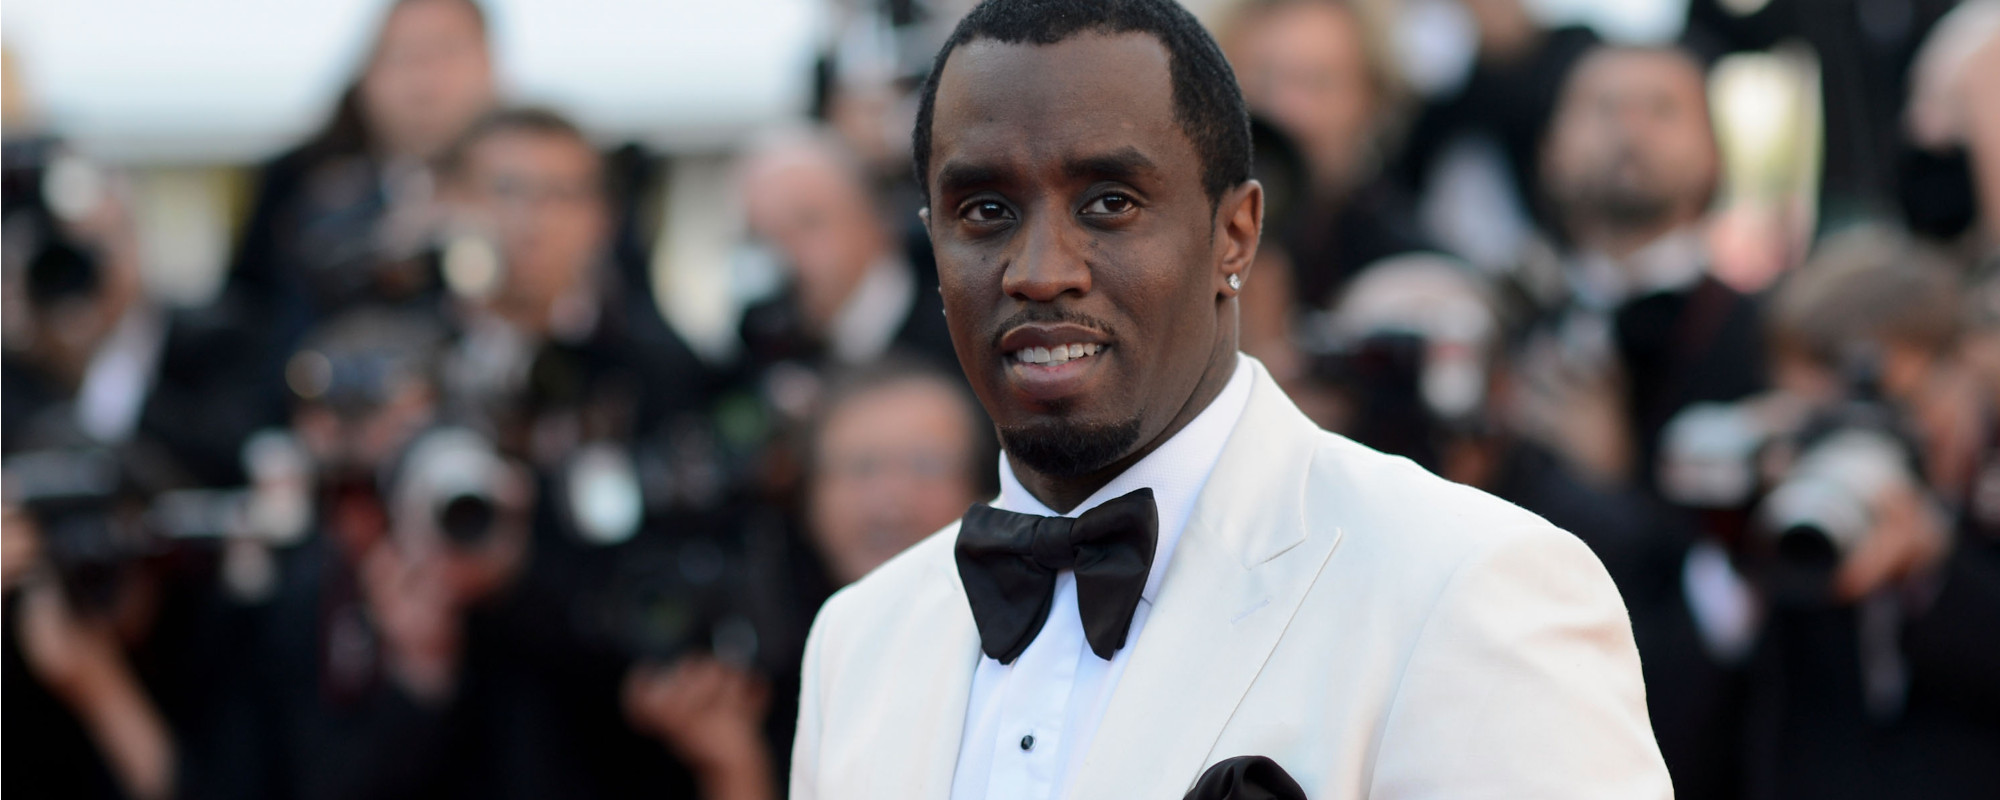 Music Producer Sues Sean ‘Diddy’ Combs For Sexual Assault and Harrassment